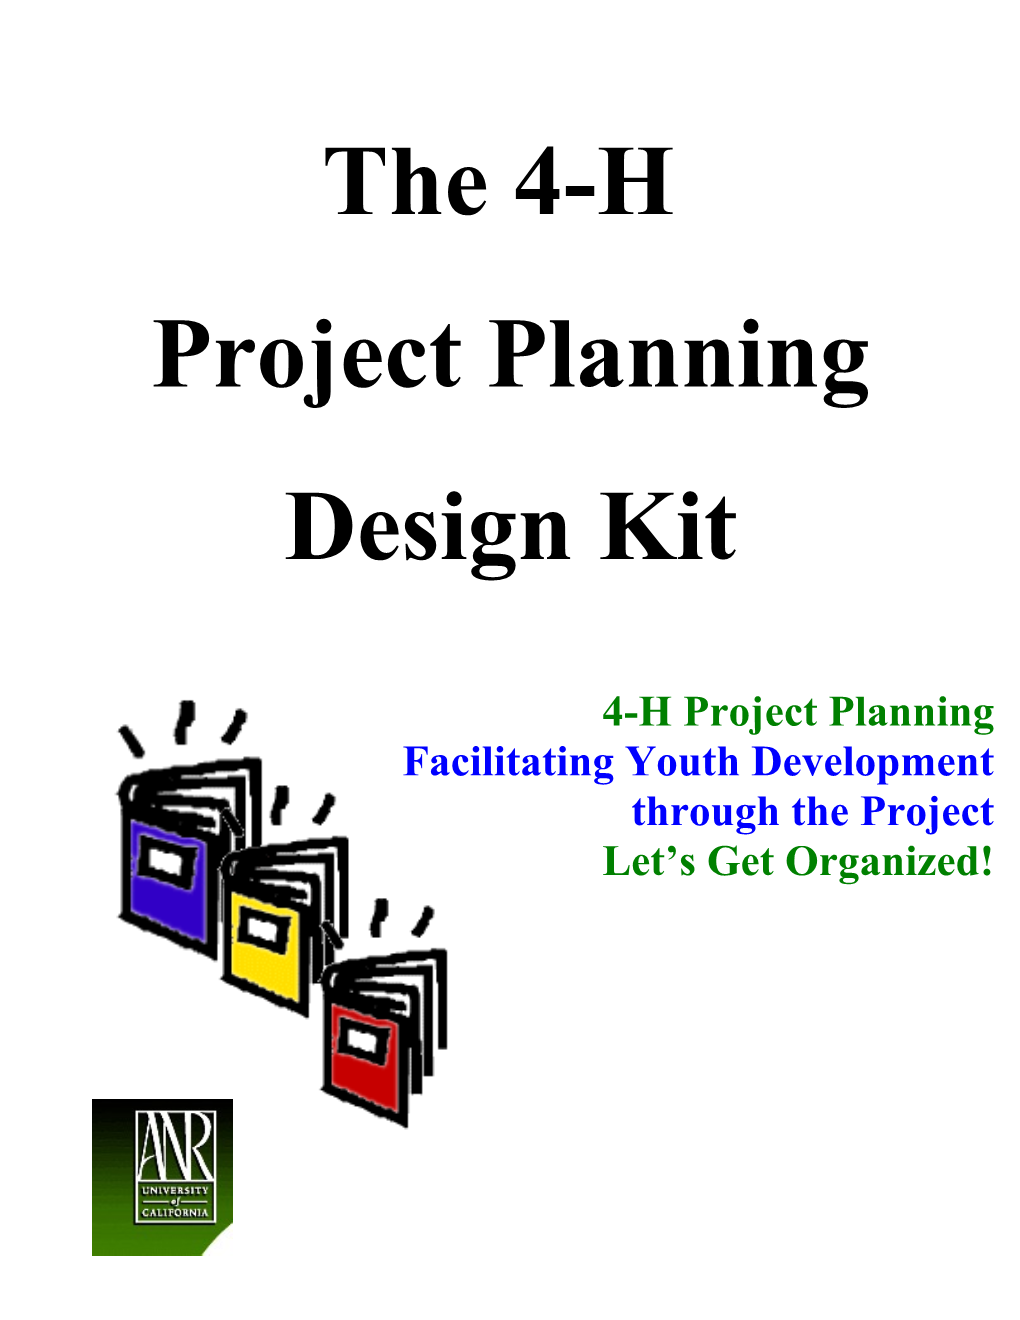 The 4-H Project Meeting Design Kit